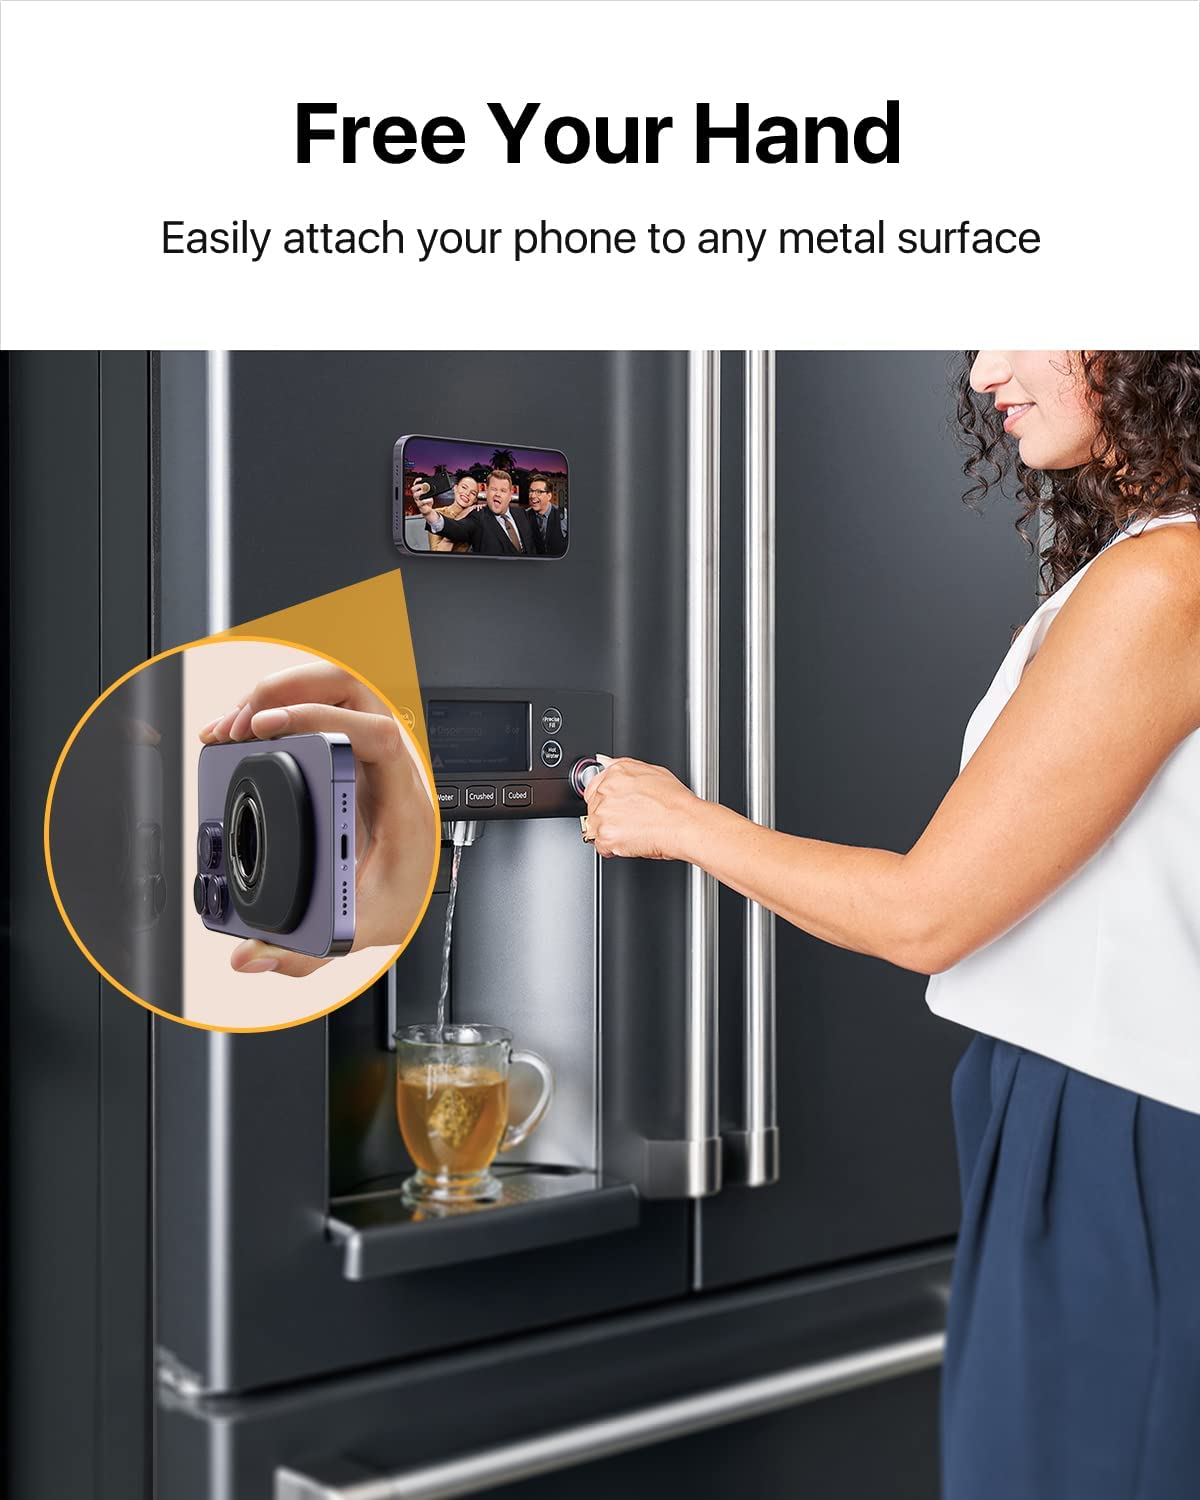 LIVE] Easyfly Double-Sided Mag Phone Grip - Free Your Hands, Enjoy Your Life